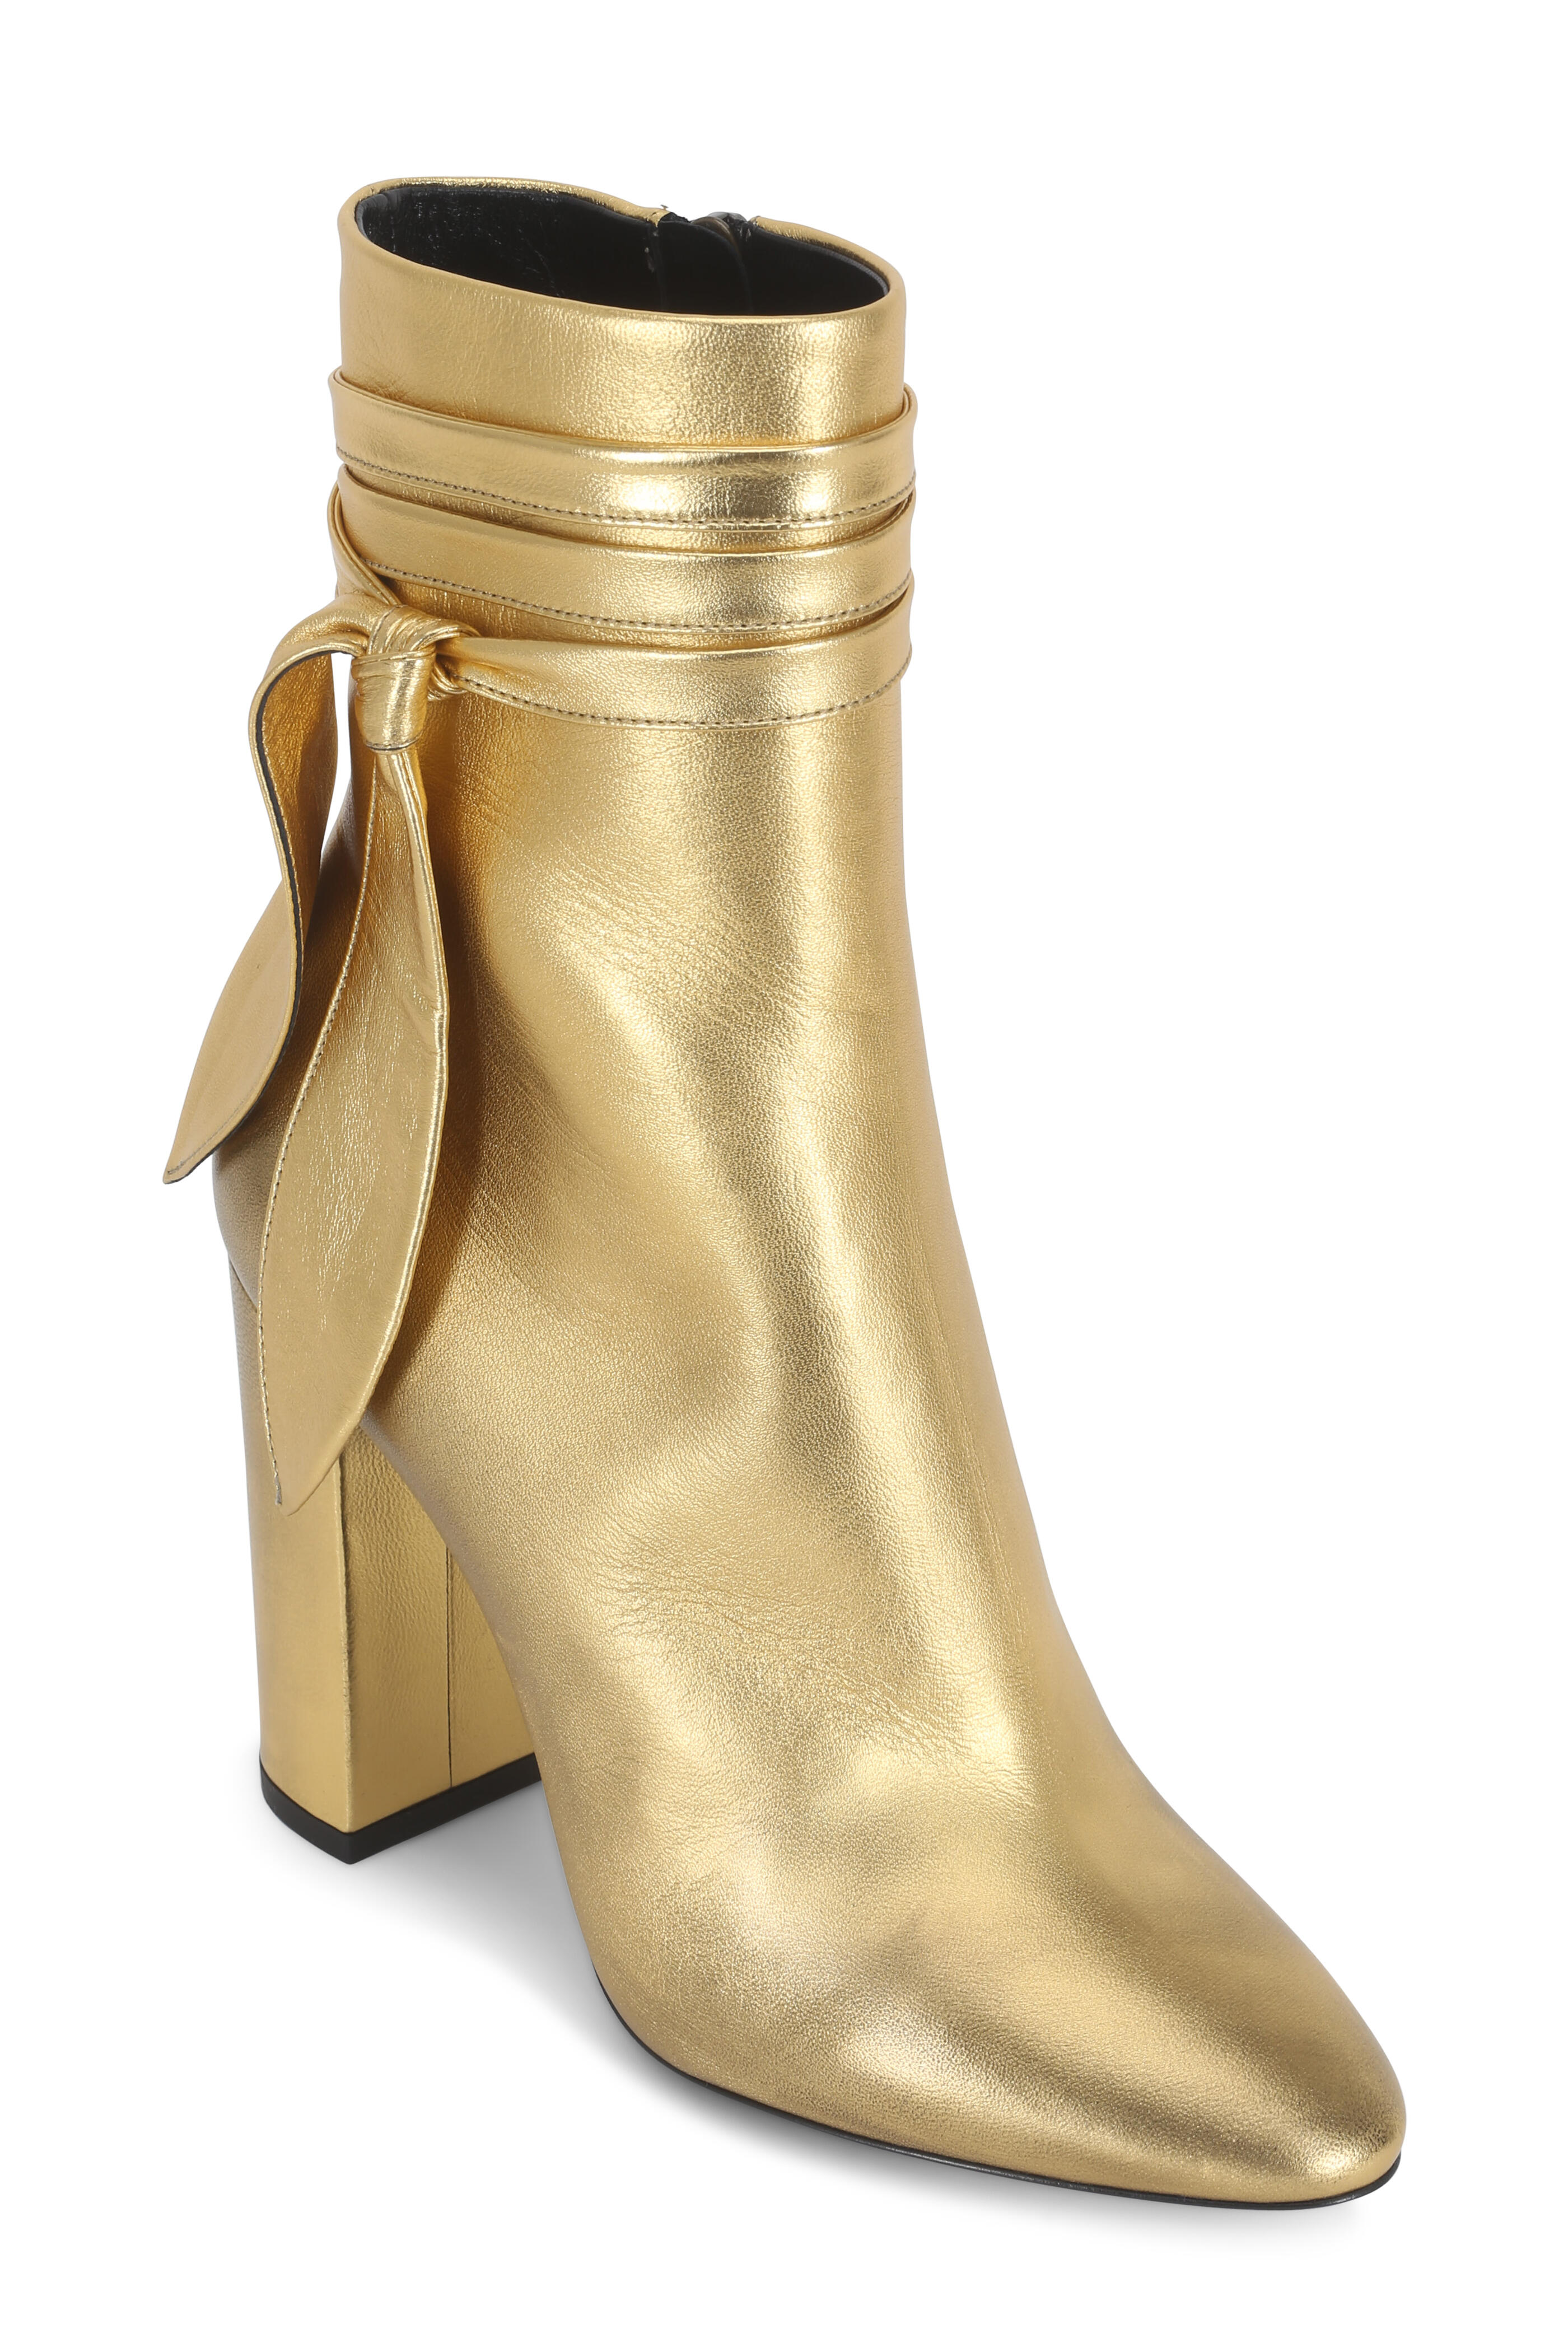 Louis Vuitton Cancan Thigh-High Boots - Gold Boots, Shoes - LOU114961